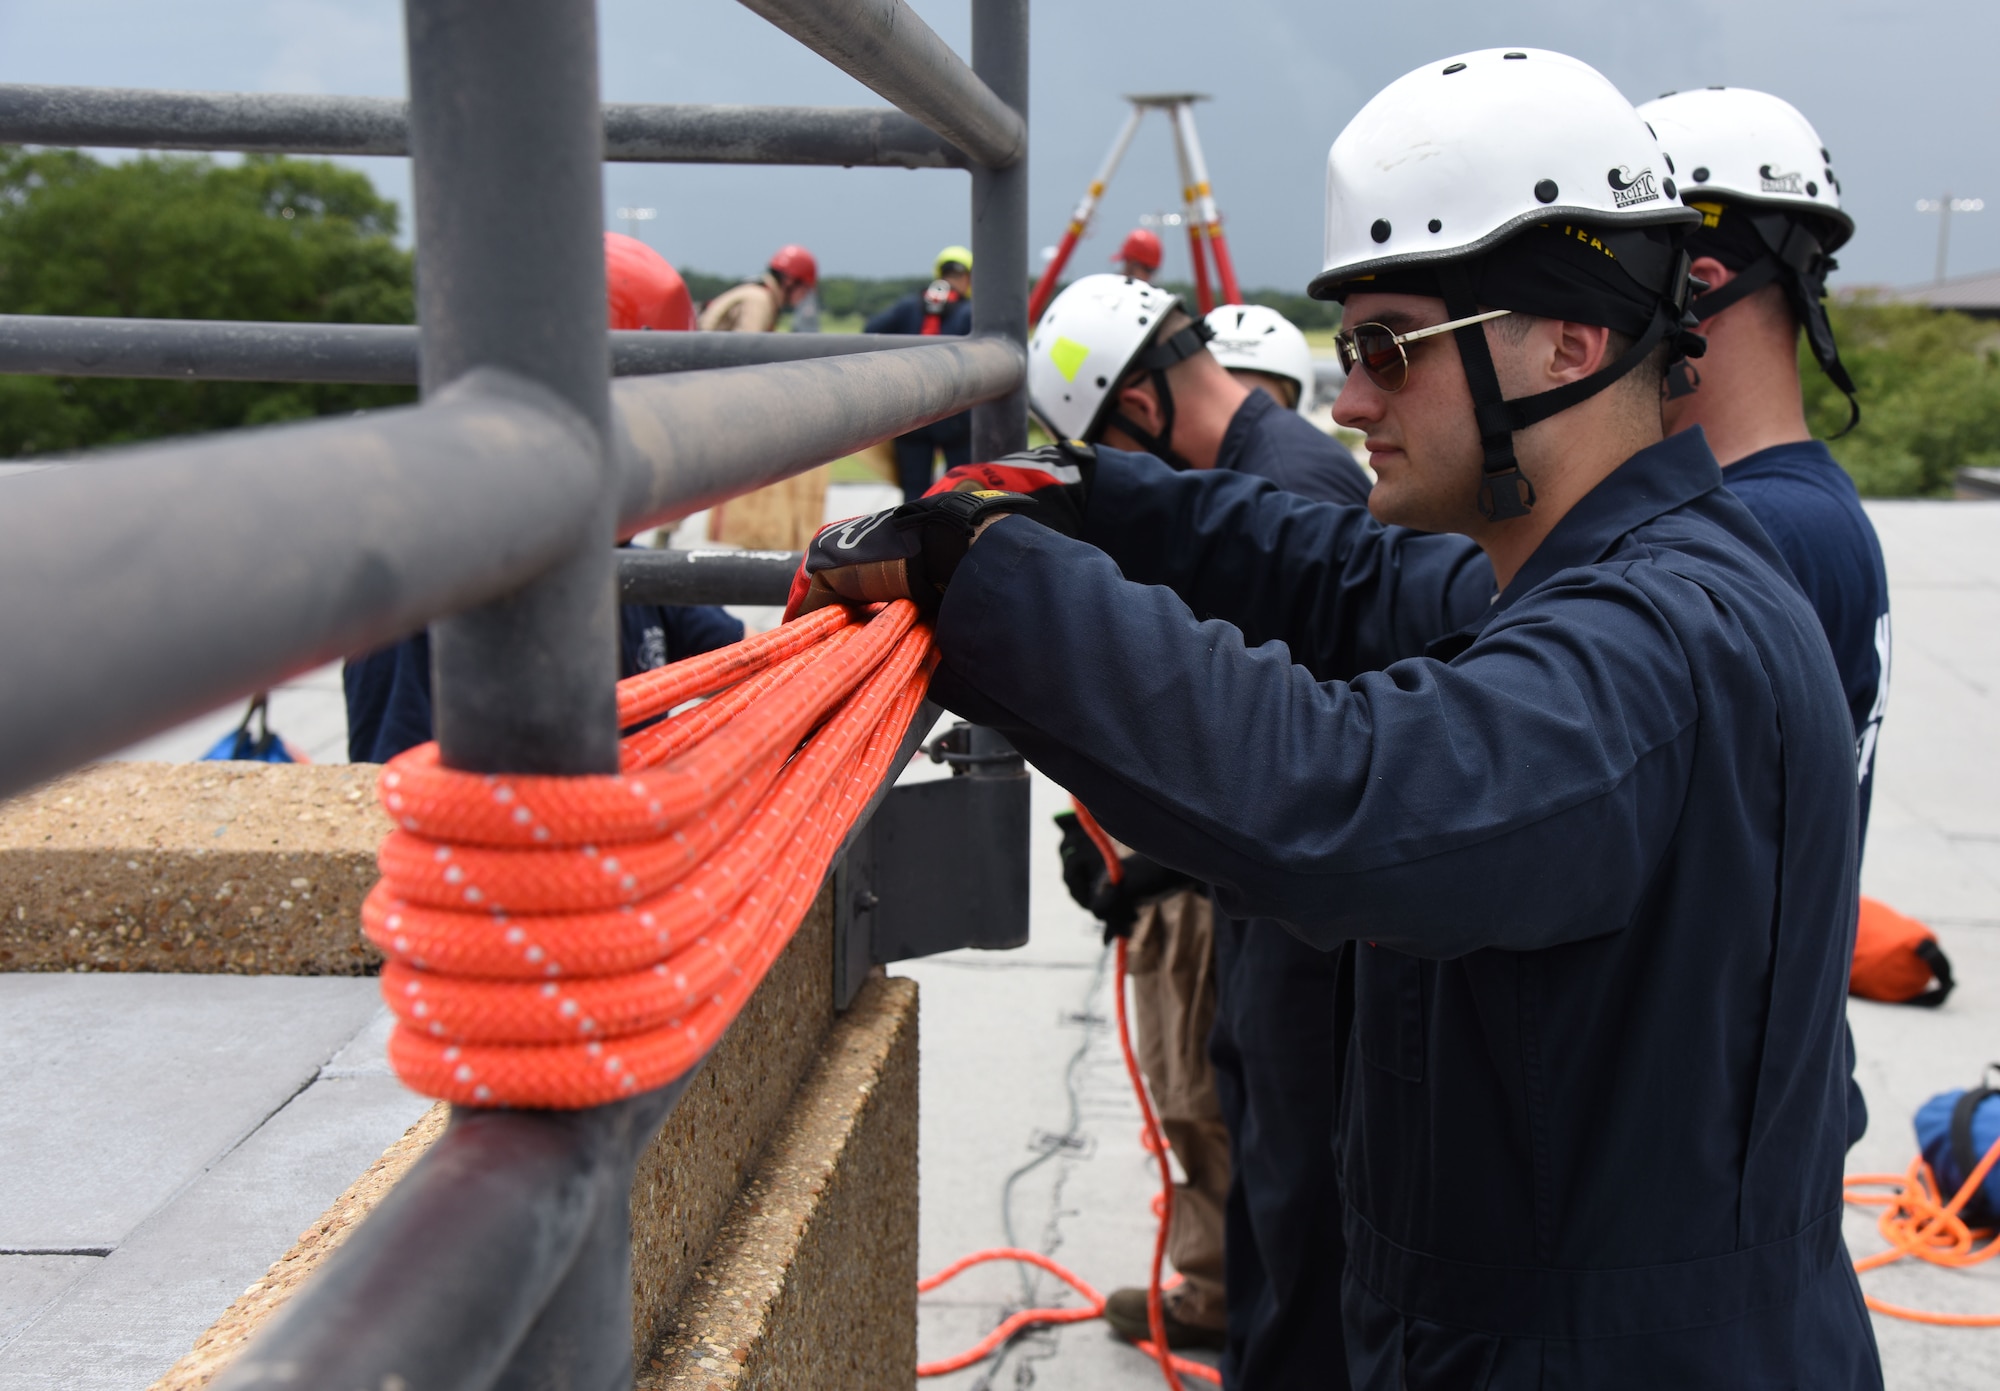 Senior Airman Chase Dillon, Keesler Firefighter, secures a rope for a controlled descent exercise atop of the Weather Training Complex during rope rescue operations training June 14, 2017, on Keesler Air Force Base, Miss. Keesler hosted the advanced rescue certification training course, which consisted of confined space rescue, high and low angle rescue and stokes basket rescue operations, for Keesler and Biloxi Firefighters. (U.S. Air Force photo by Kemberly Groue)